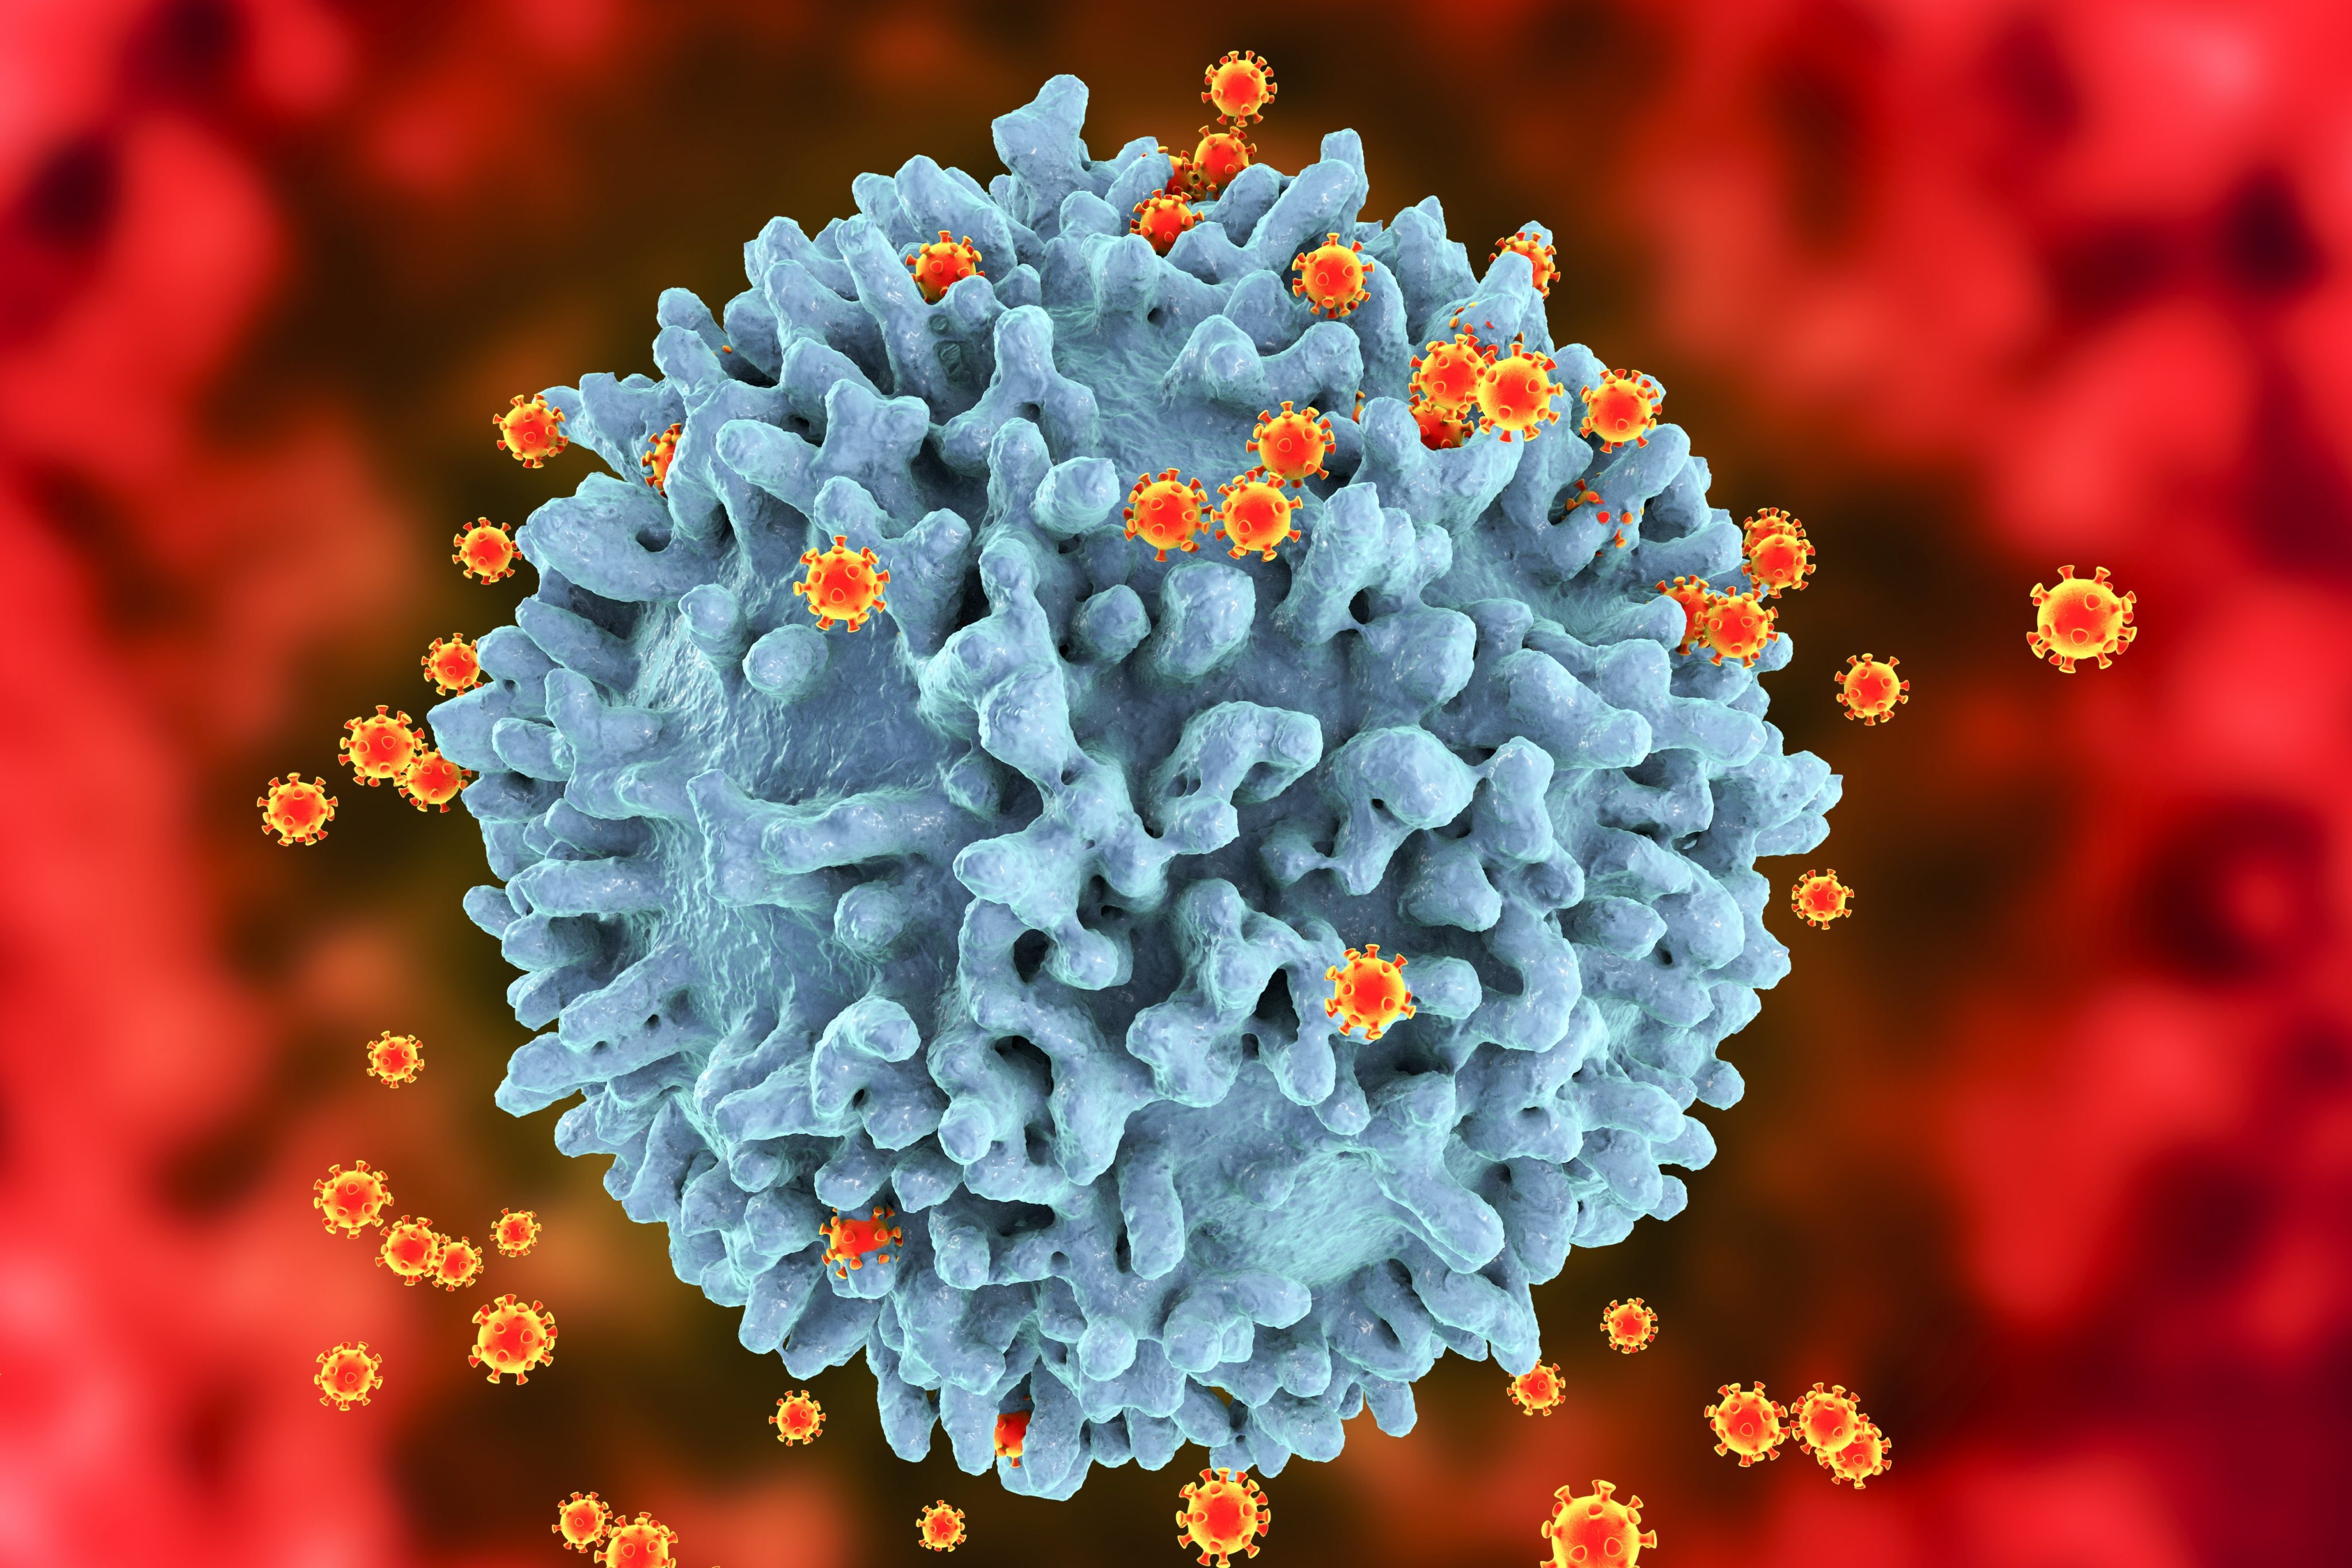 A ‘highly virulent’ HIV strain has been found in the Netherlands.